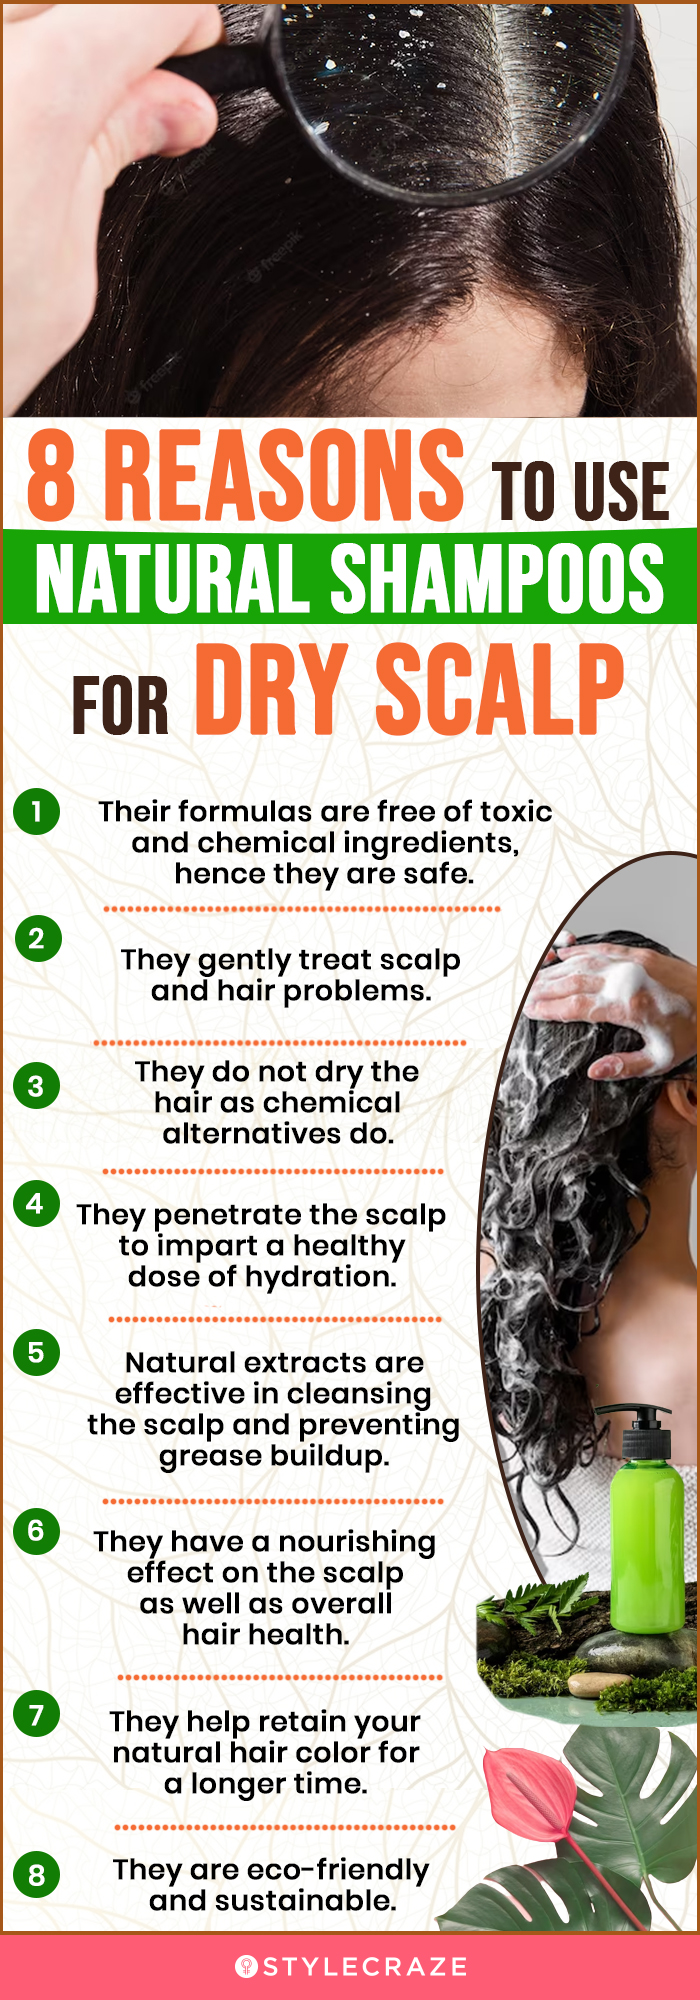 Reasons To Use Natural Shampoos For Dry Scalp (infographic)